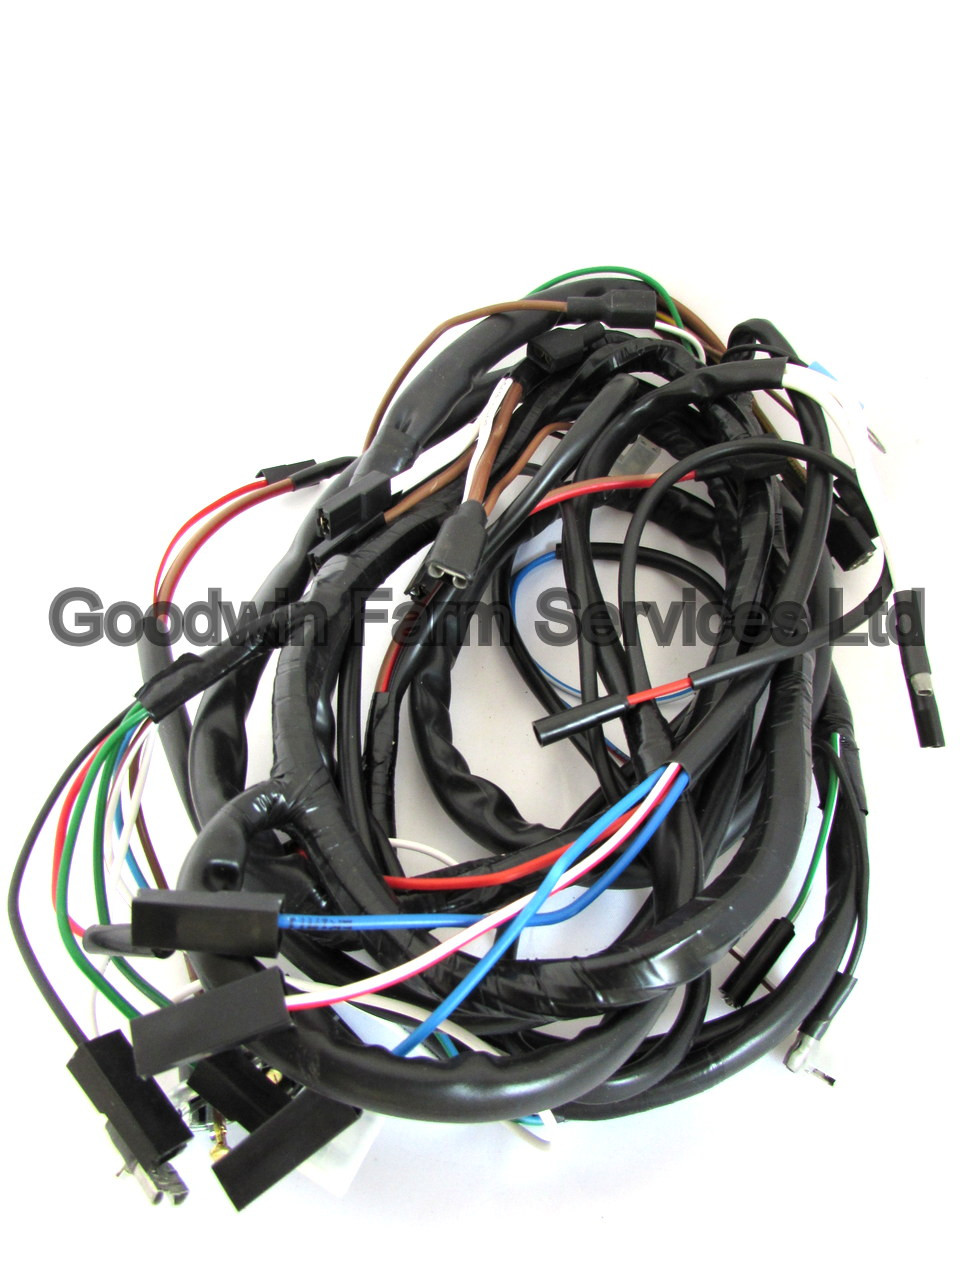 ford wiring harness